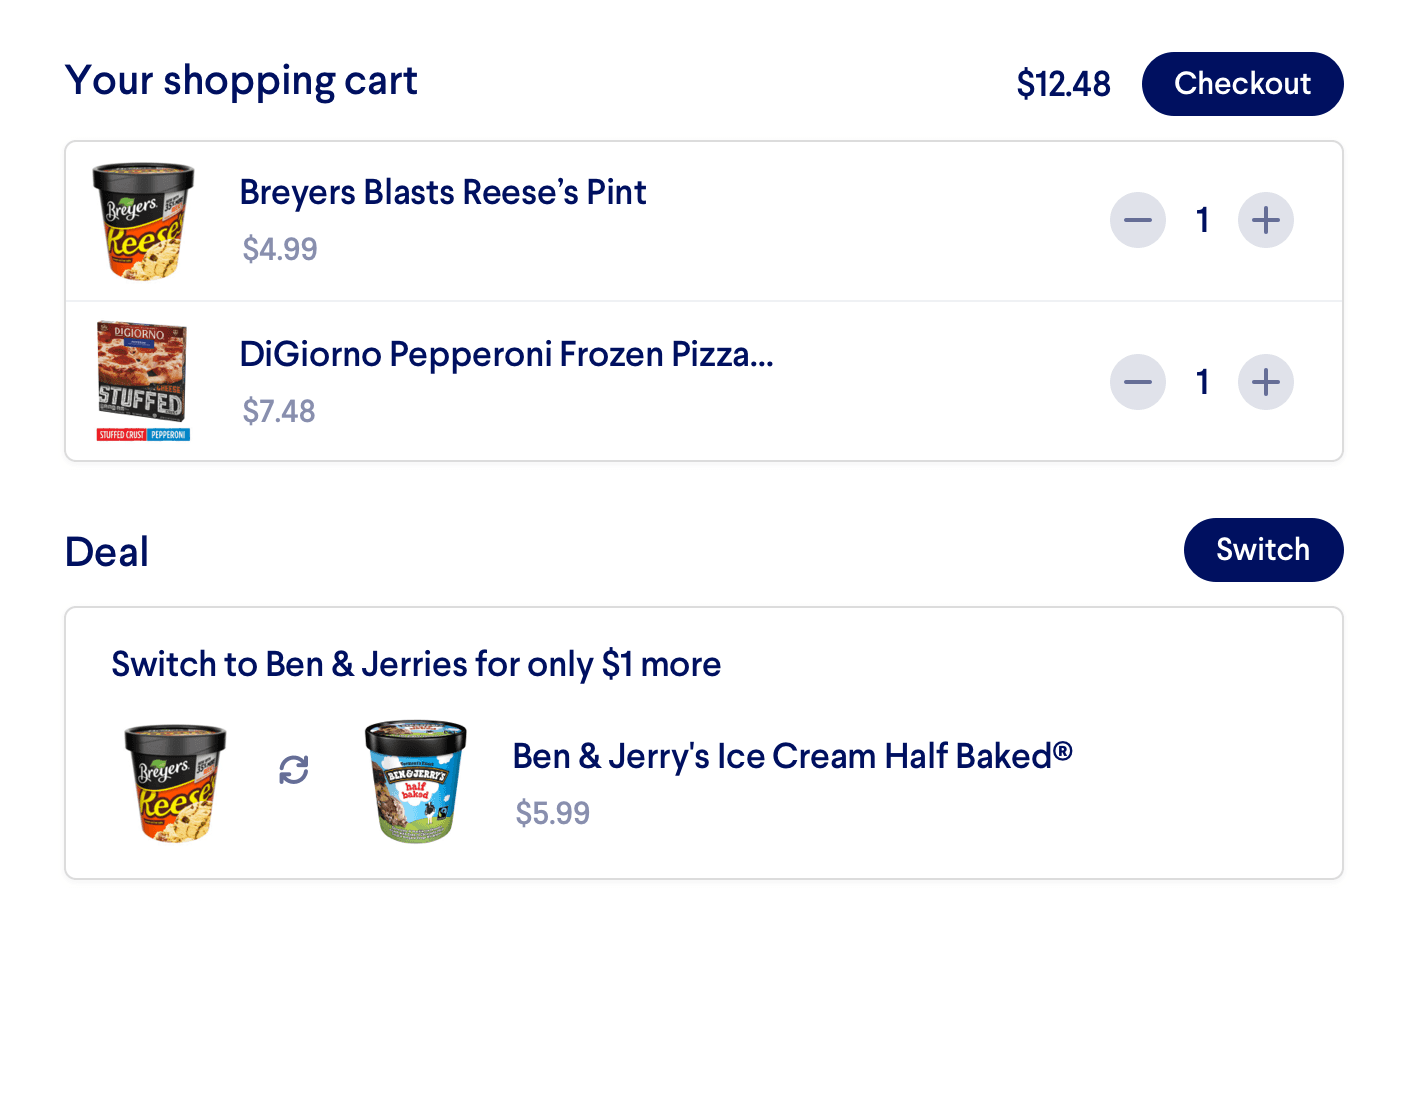 Example for Cart Upsells